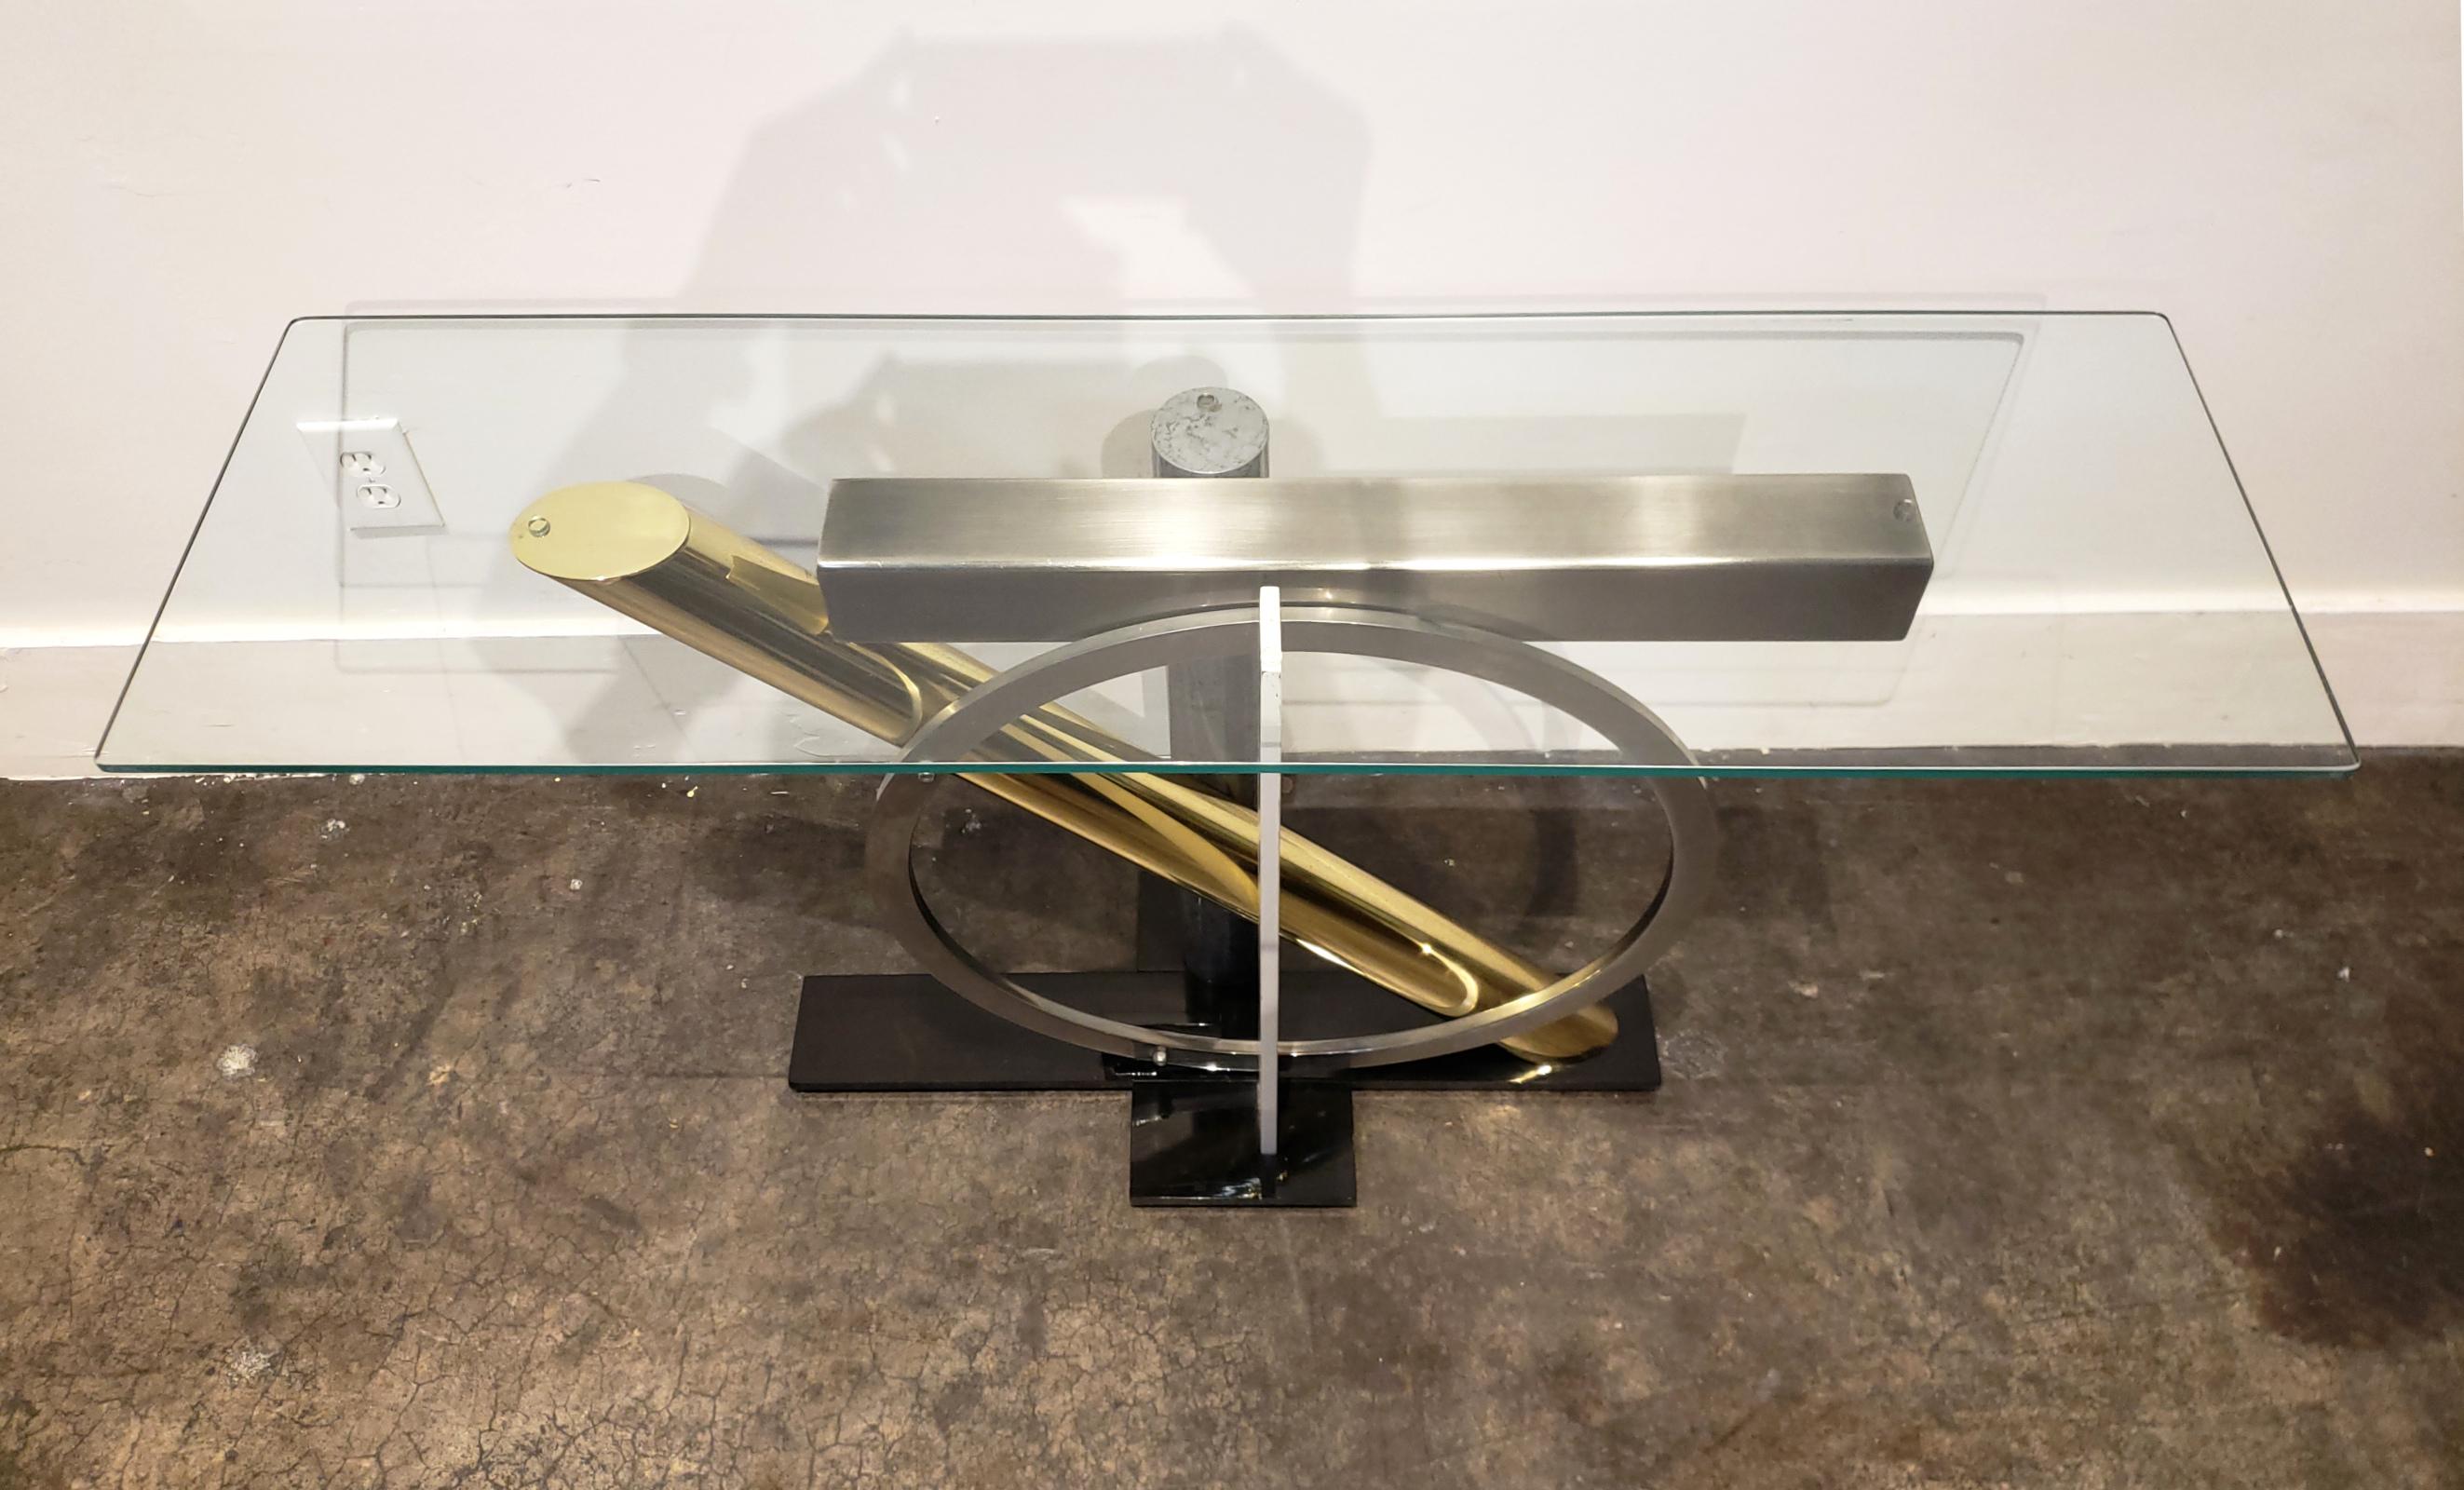 1980s Geometric Metal and Glass Memphis Style Console Table by Kaizo Oto for DIA In Good Condition For Sale In Dallas, TX